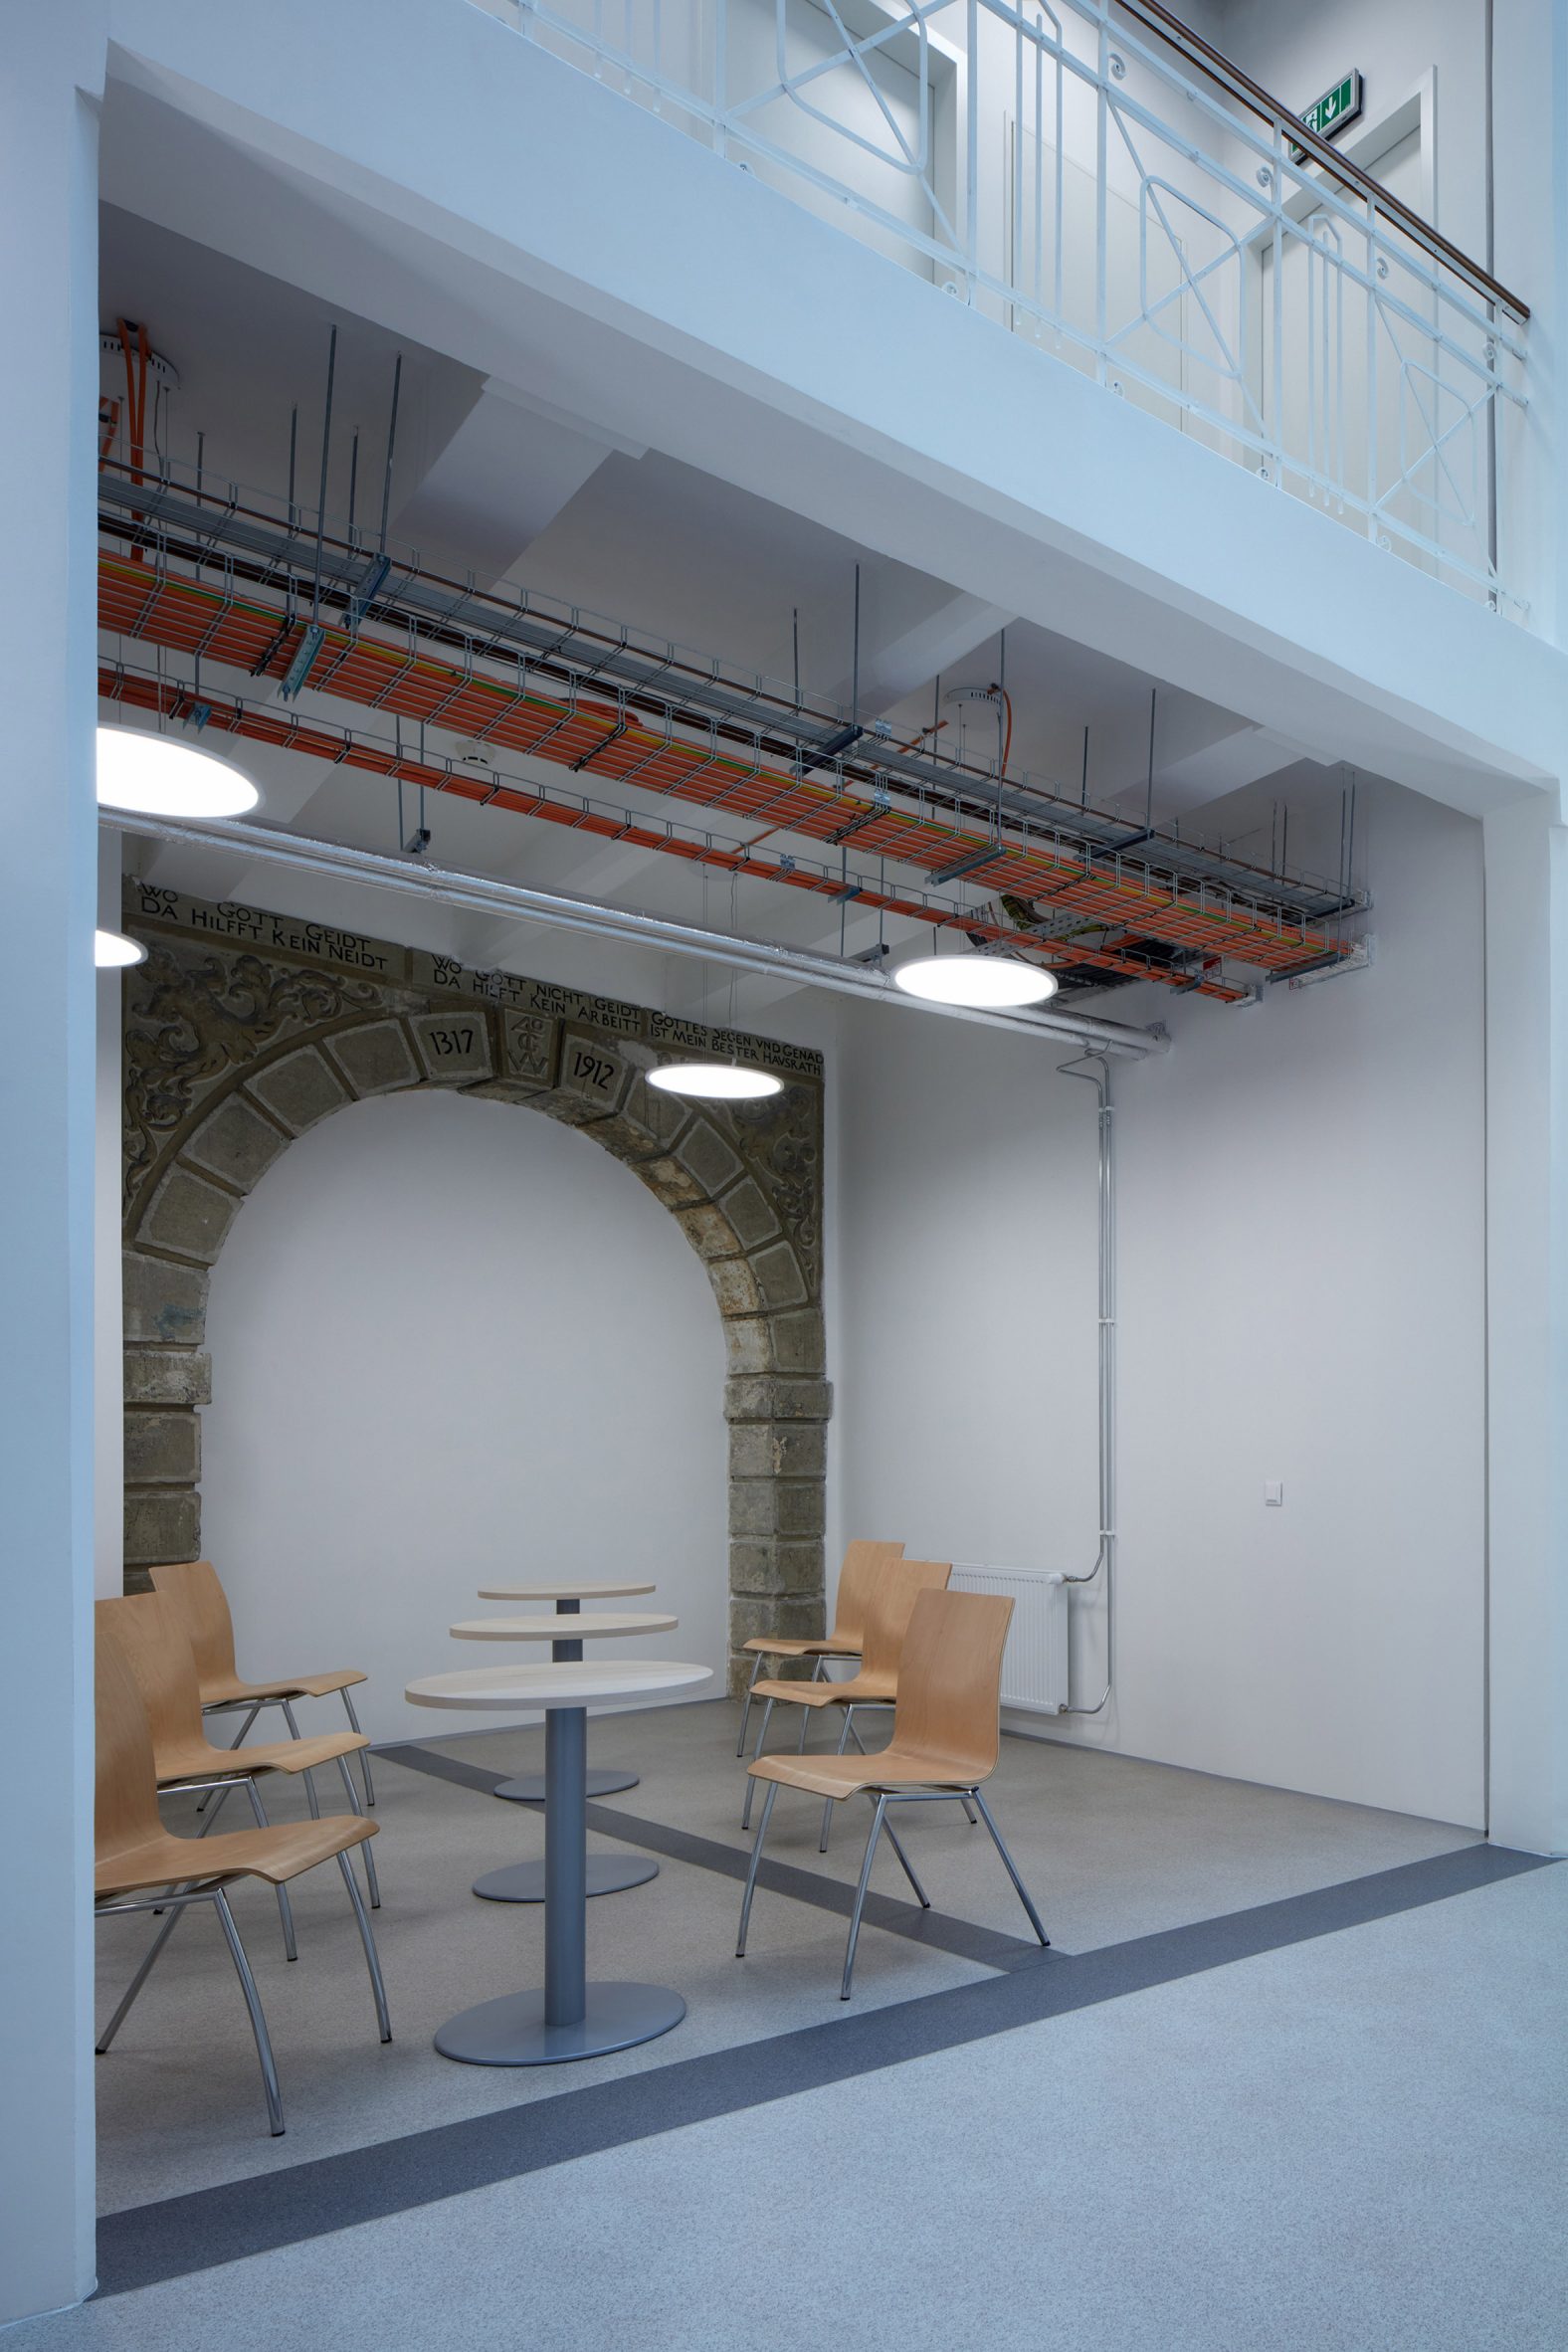 Photograph showing neutral-coloured meeting space with original archway detail inset into wall